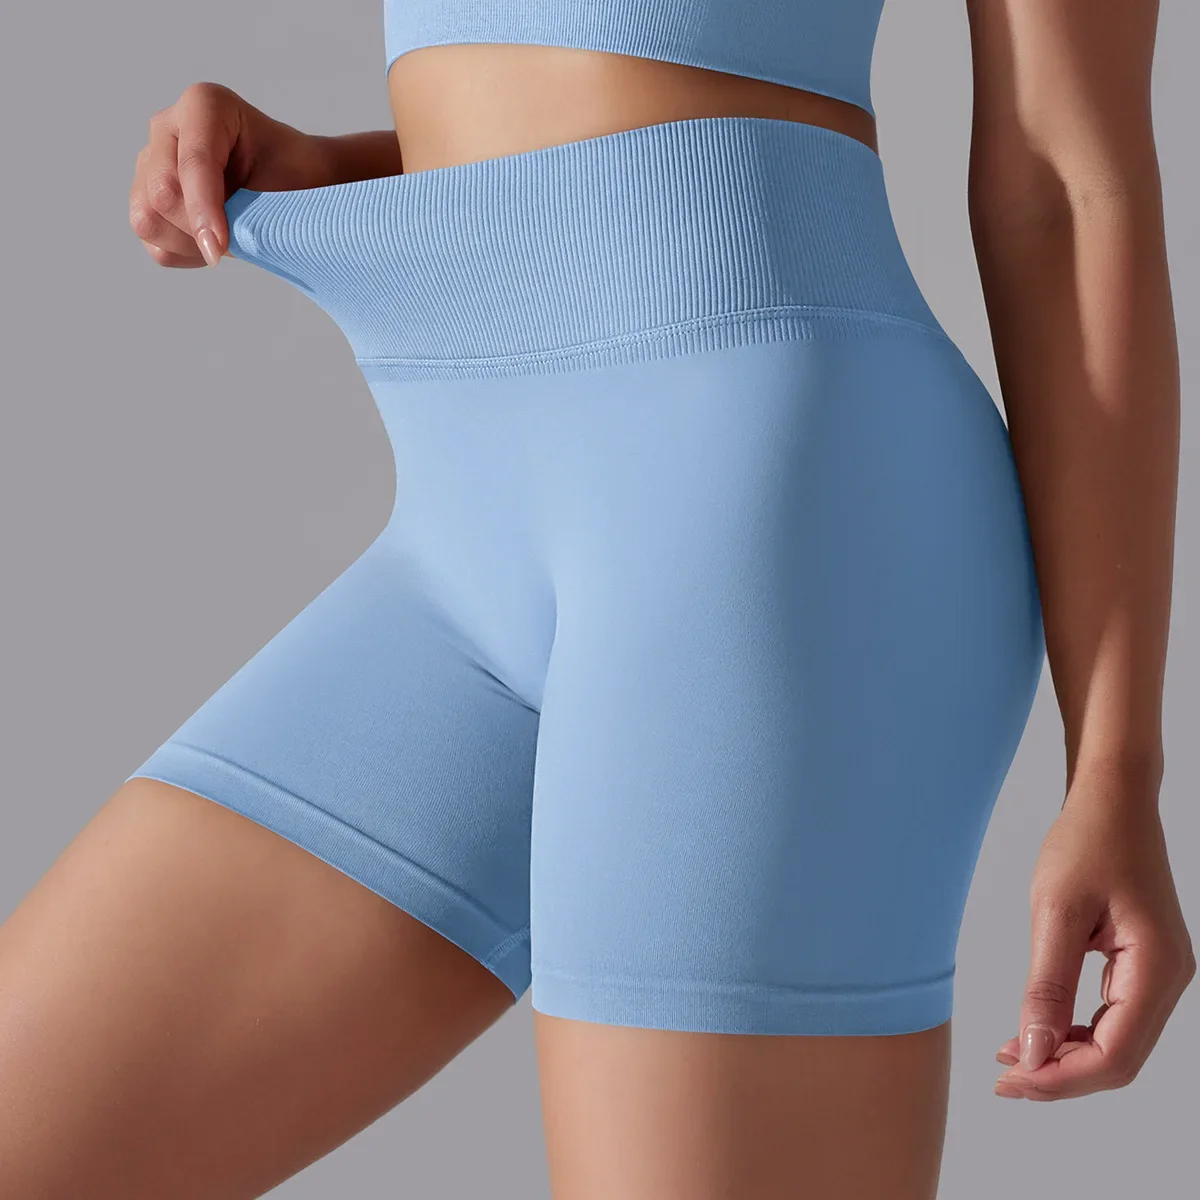 Seamless Push Up Scrunch Yoga Shorts Women Fitness Running Sports Short Gym Clothing Workout Clothes Execise Tight Short Legging